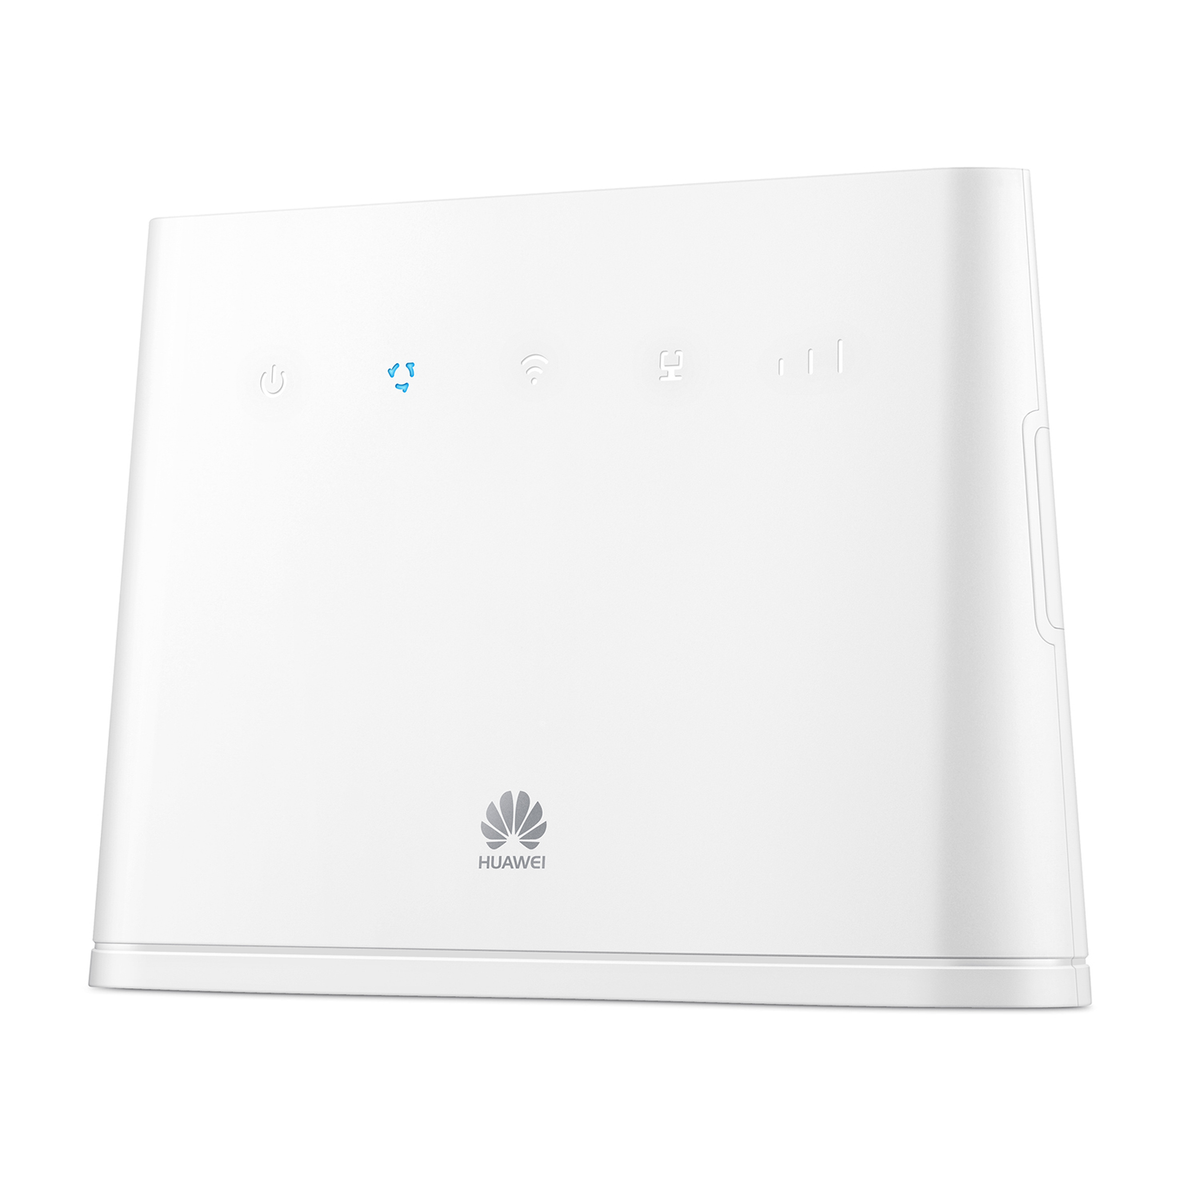 Router WHITE Mbit/s 150 LTE DL B311S-221 STAT 4G 150MBPS CAT4 HUAWEI ROUTER